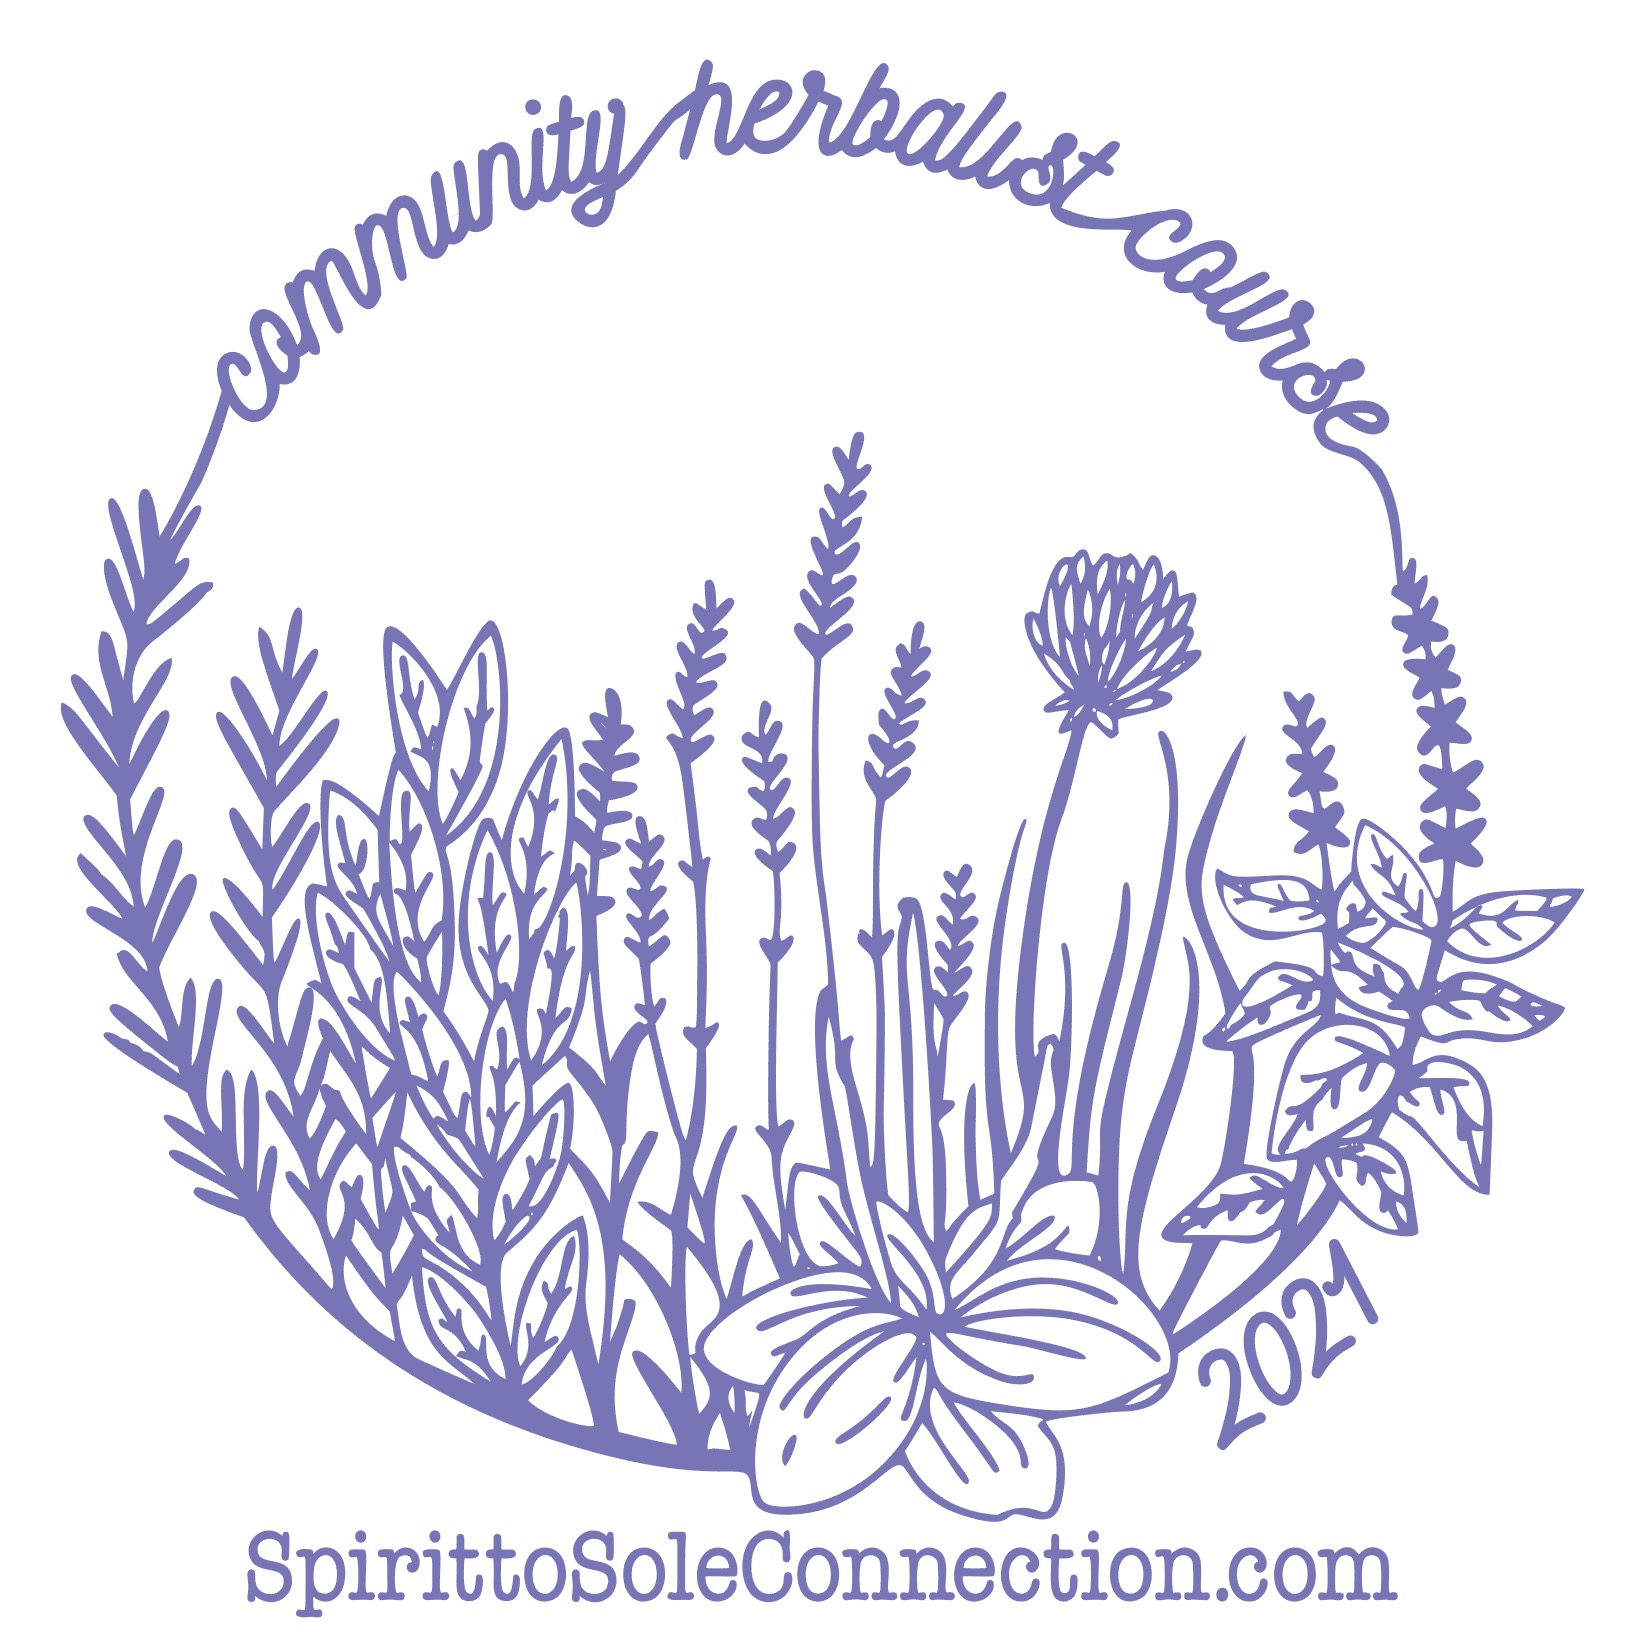 Community Herbalist Course 2021 – Tuition Installments